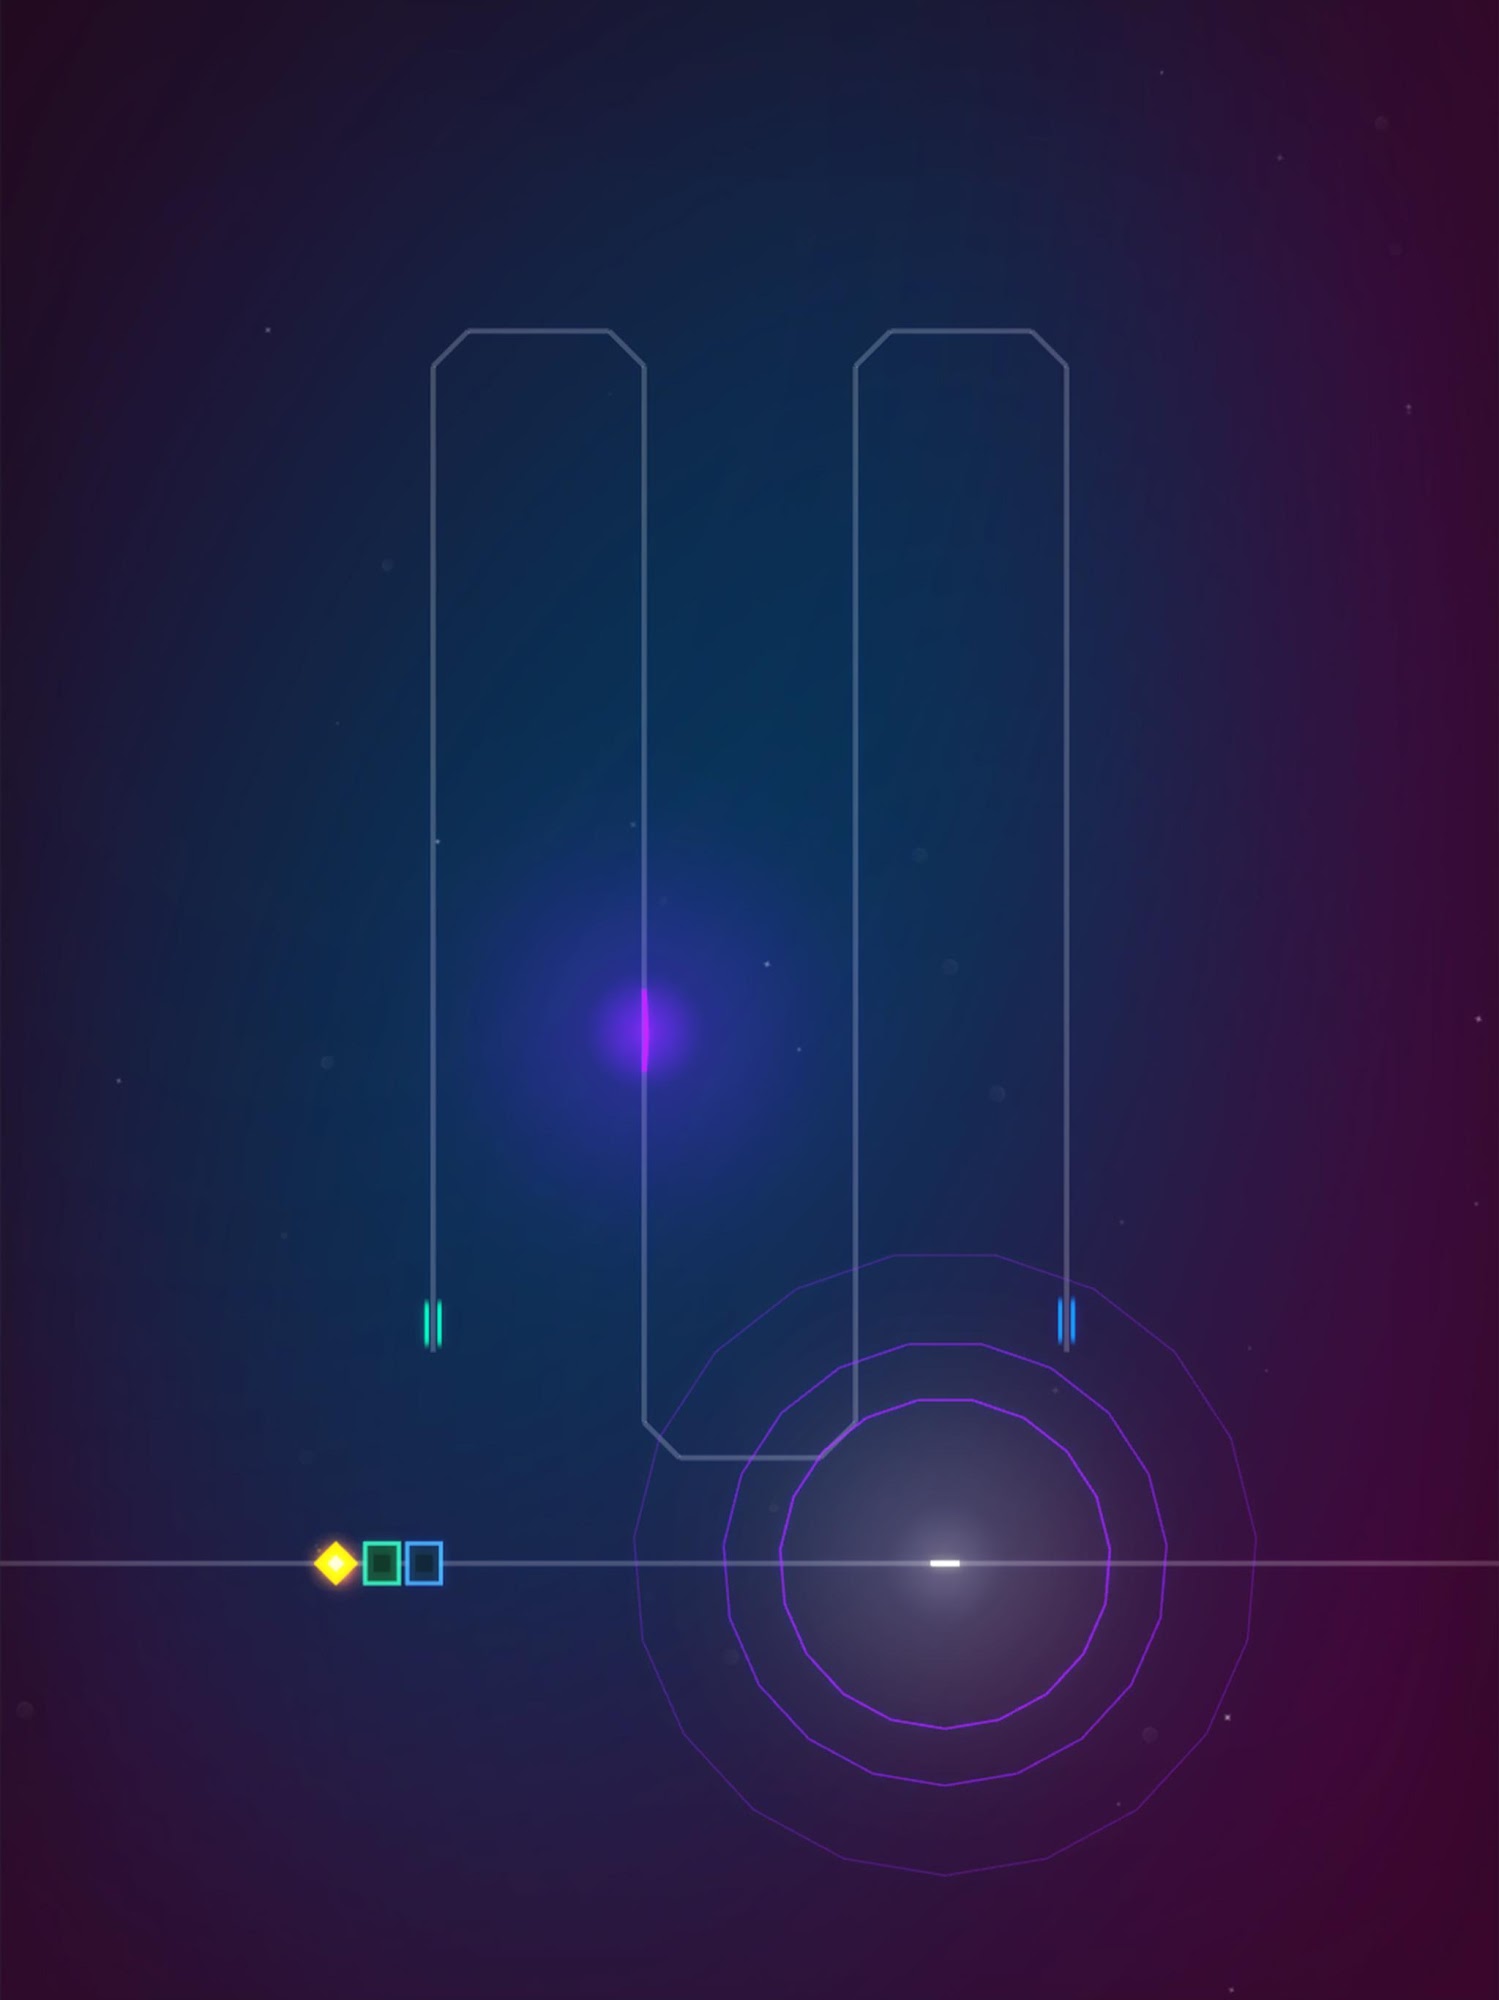 Linelight - Android game screenshots.